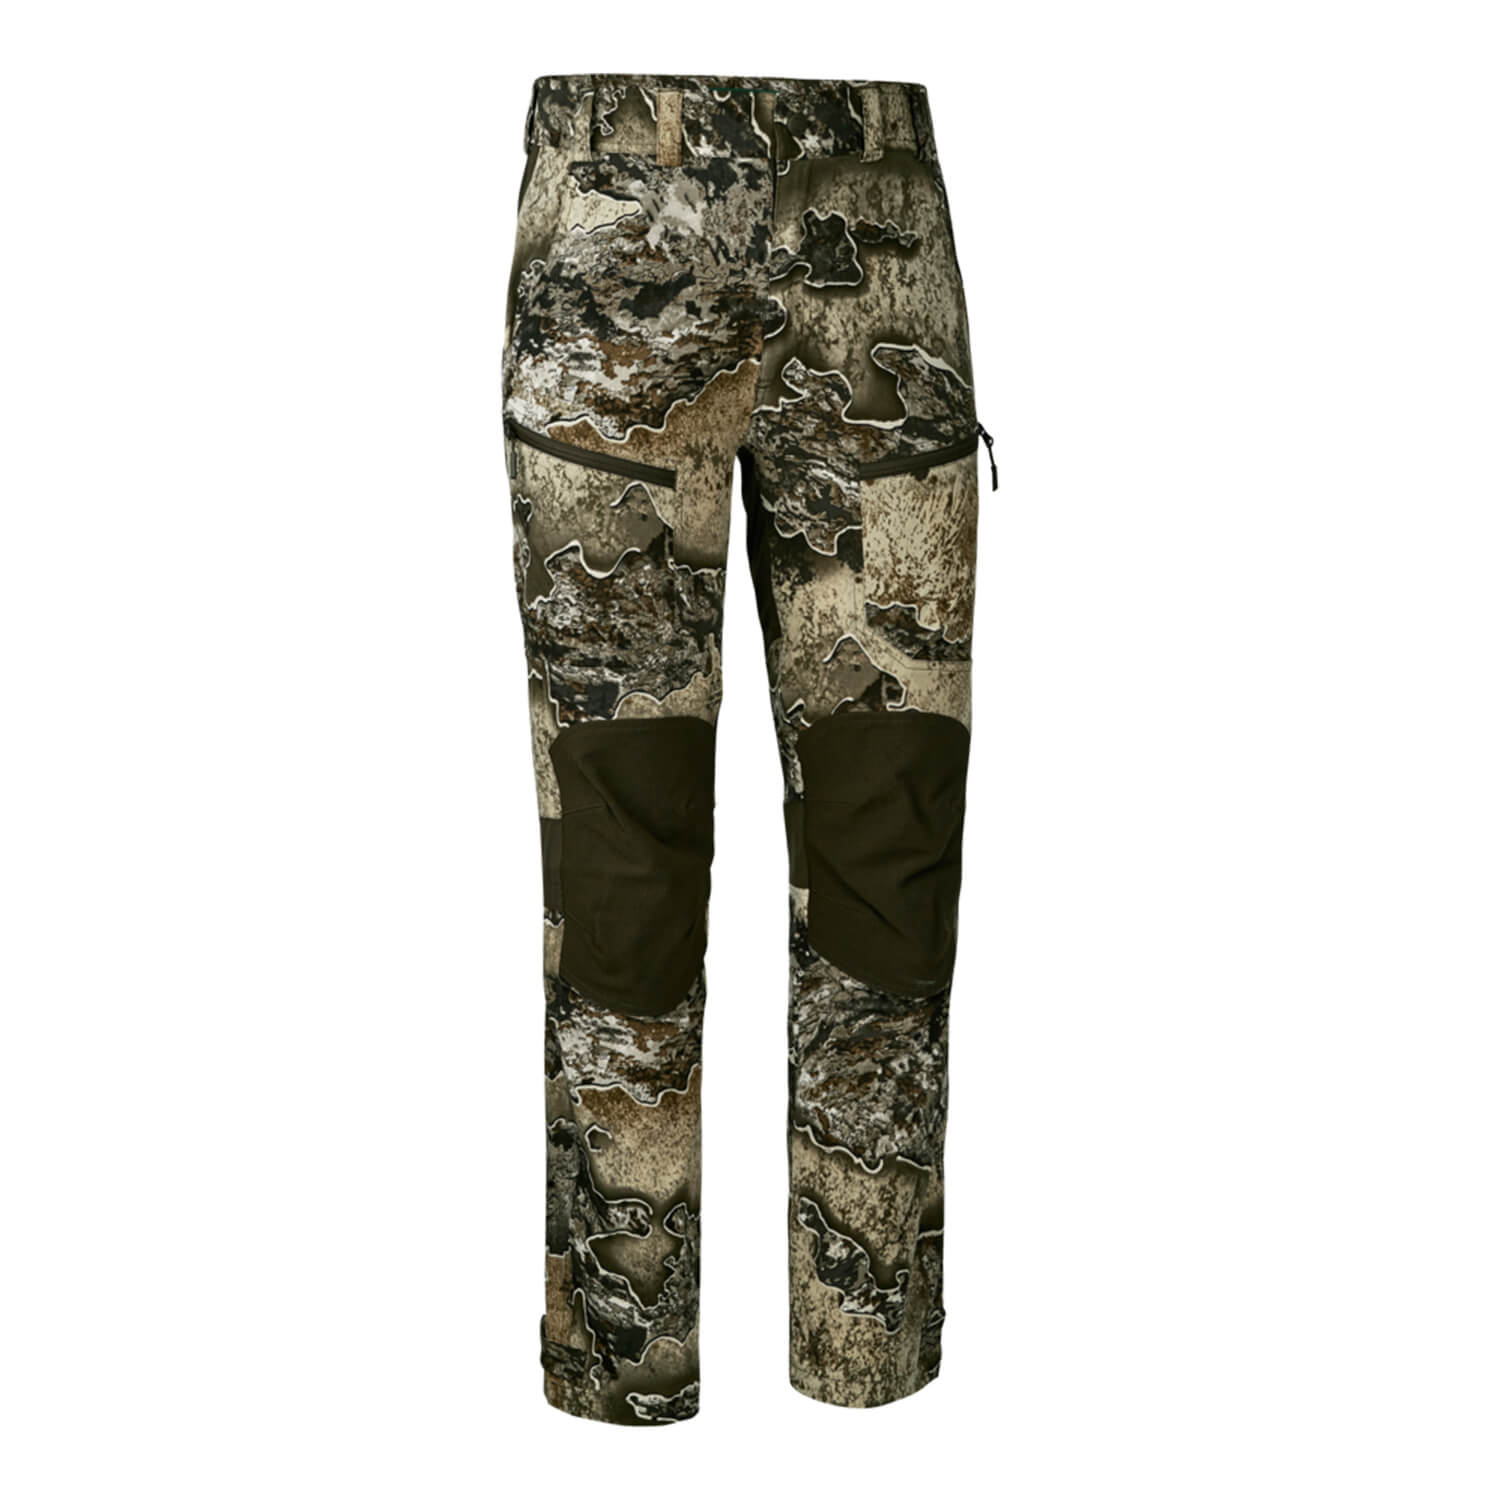 Deerhunter Trousers Excape Light (Realtree Excape) - Camouflage Trousers